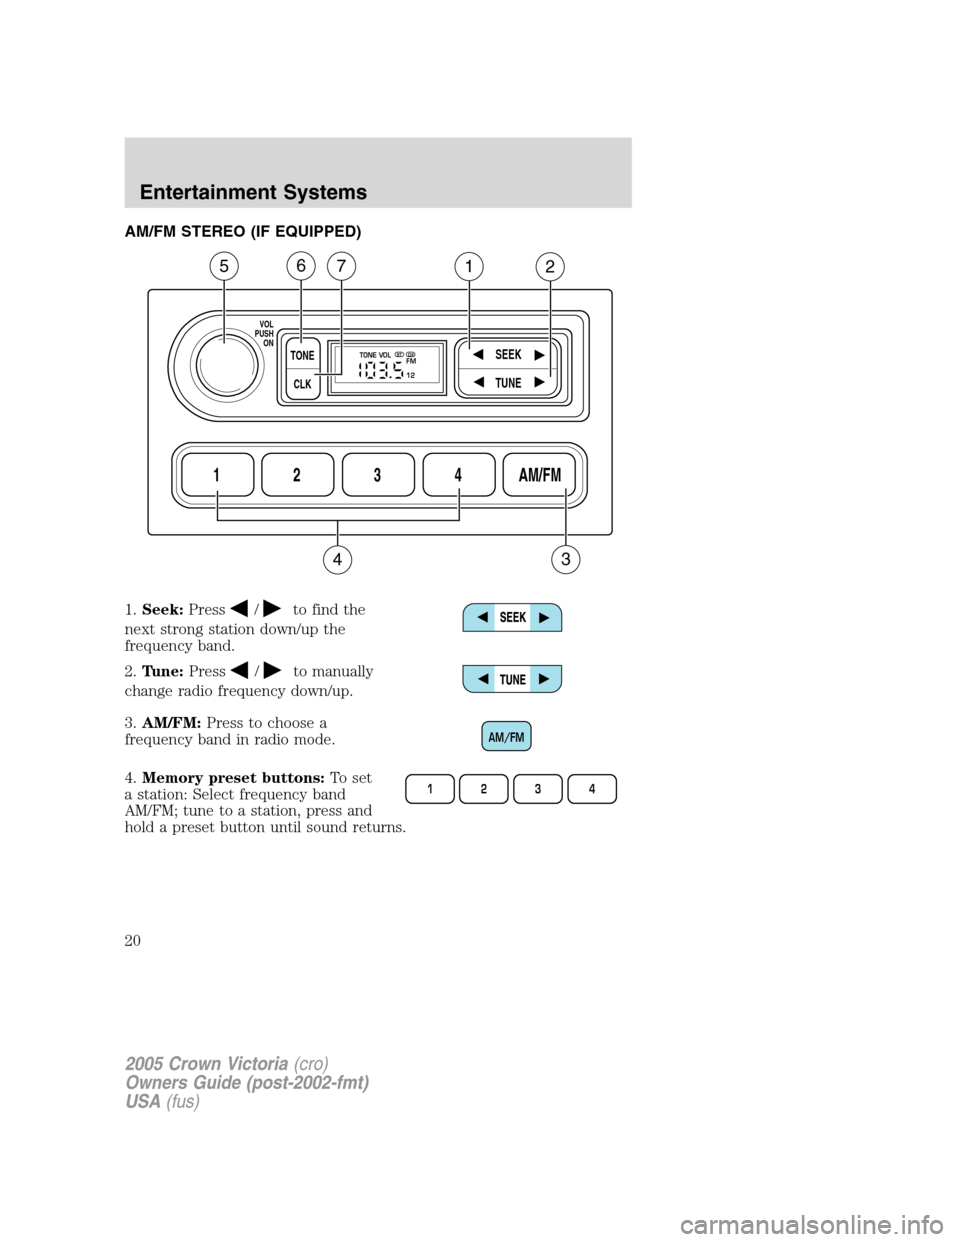 FORD CROWN VICTORIA 2005 2.G User Guide AM/FM STEREO (IF EQUIPPED)
1.Seek:Press
/to find the
next strong station down/up the
frequency band.
2.Tune:Press
/to manually
change radio frequency down/up.
3.AM/FM:Press to choose a
frequency band 